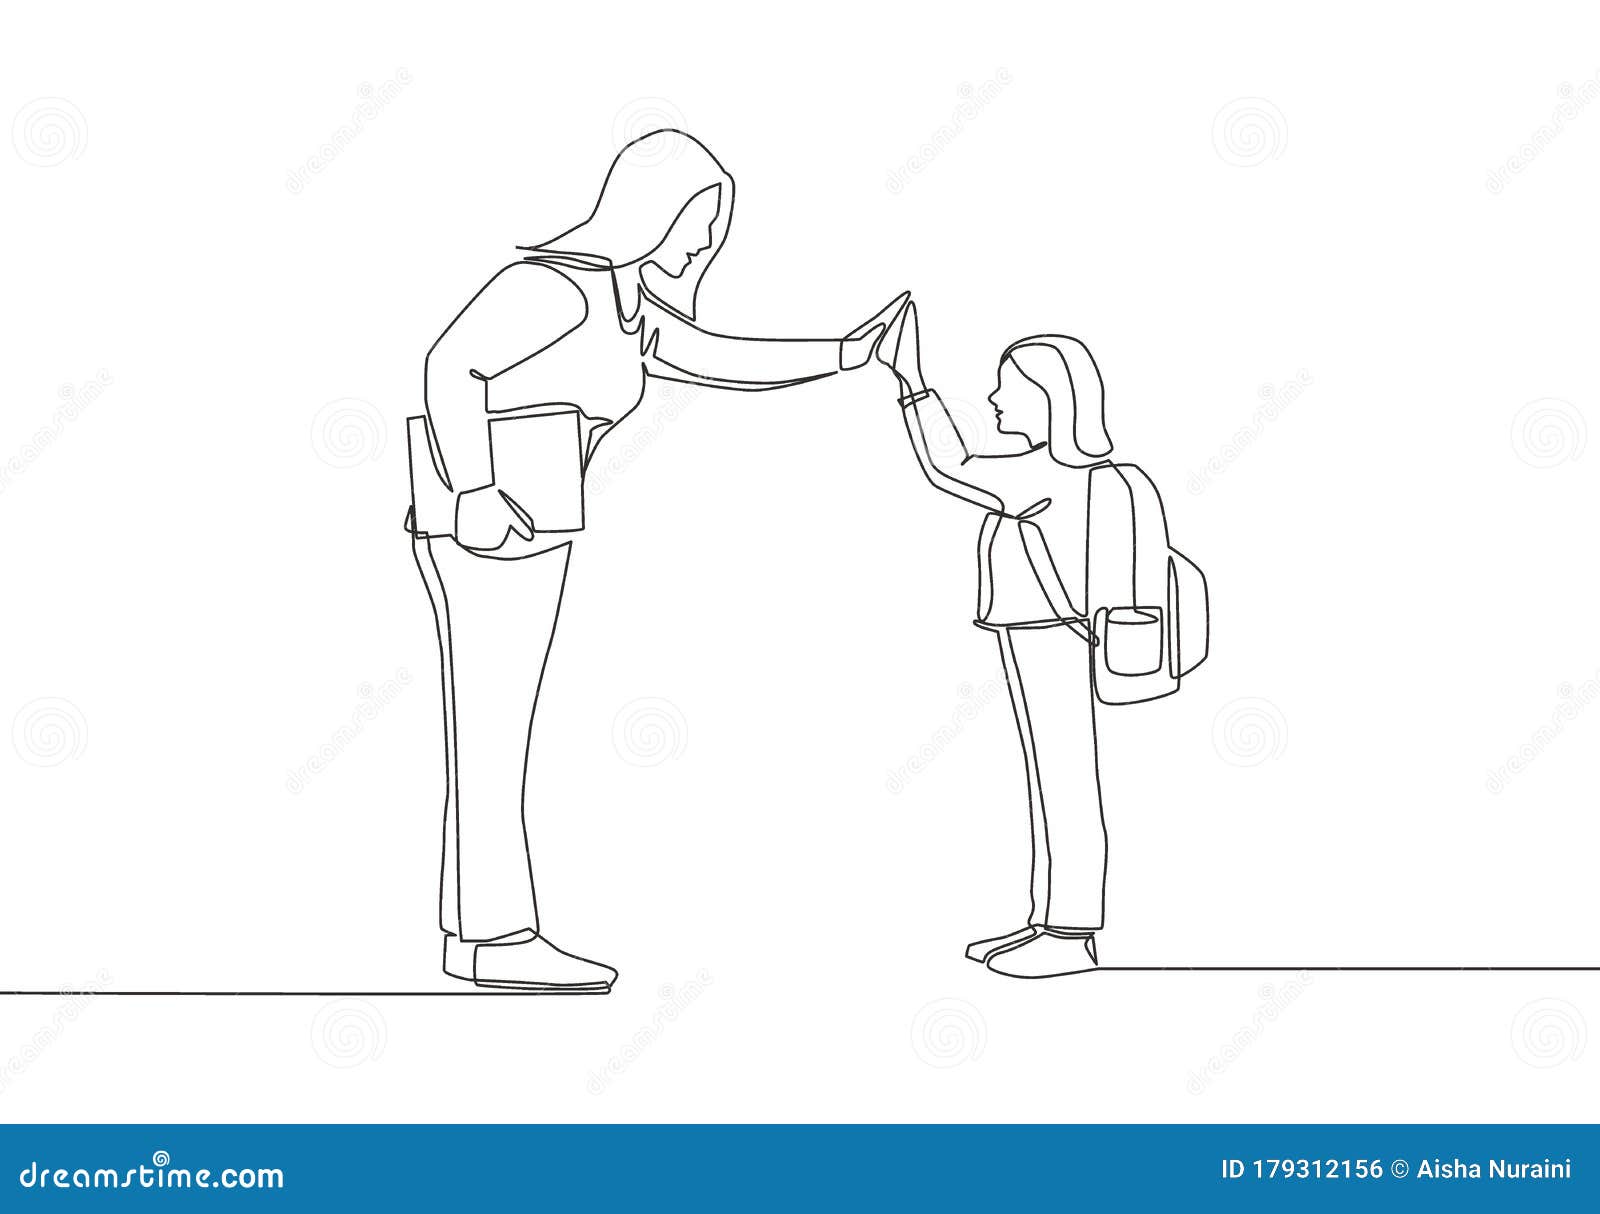 Teacher Line Drawing PNG Images - Pngtree